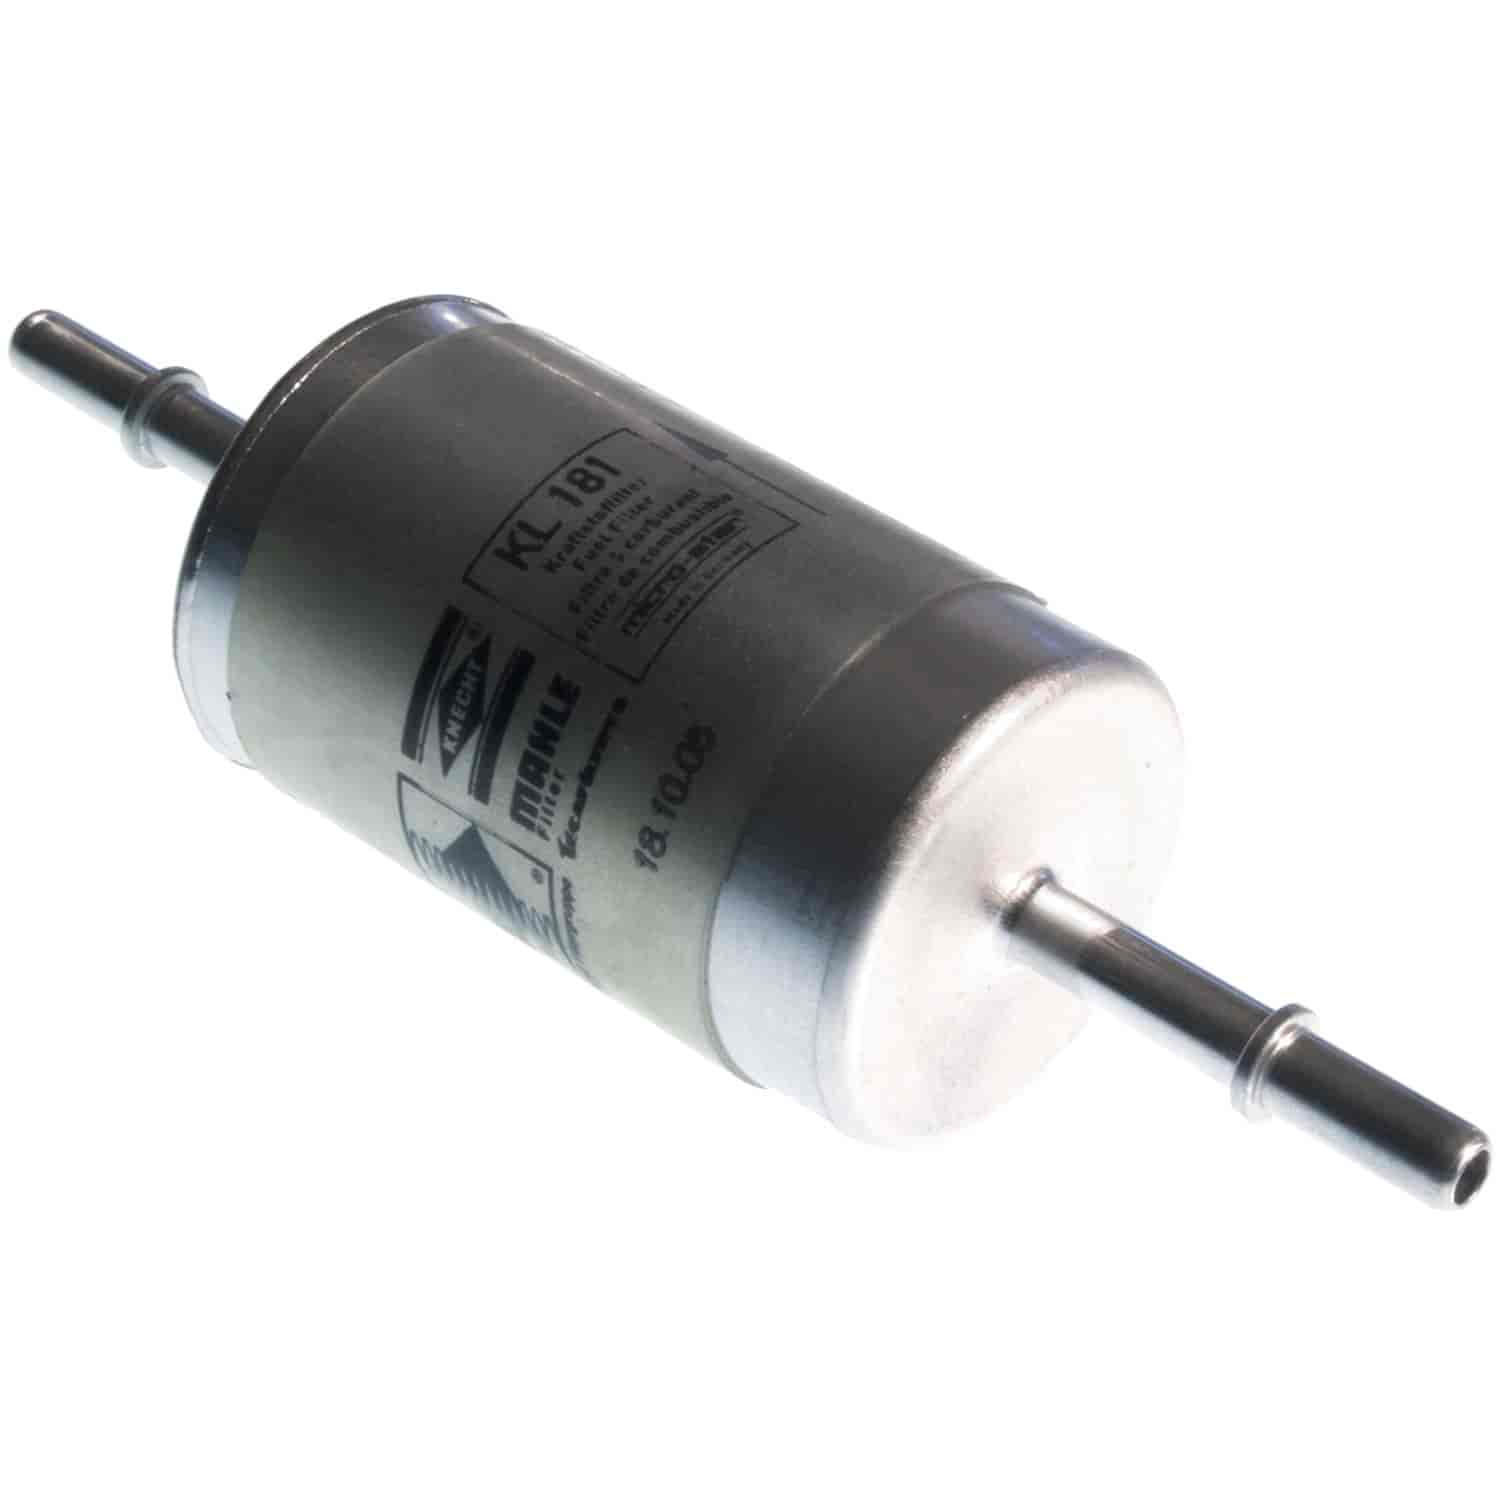 Mahle Fuel Filter 1998-2011 Various Ford Applications